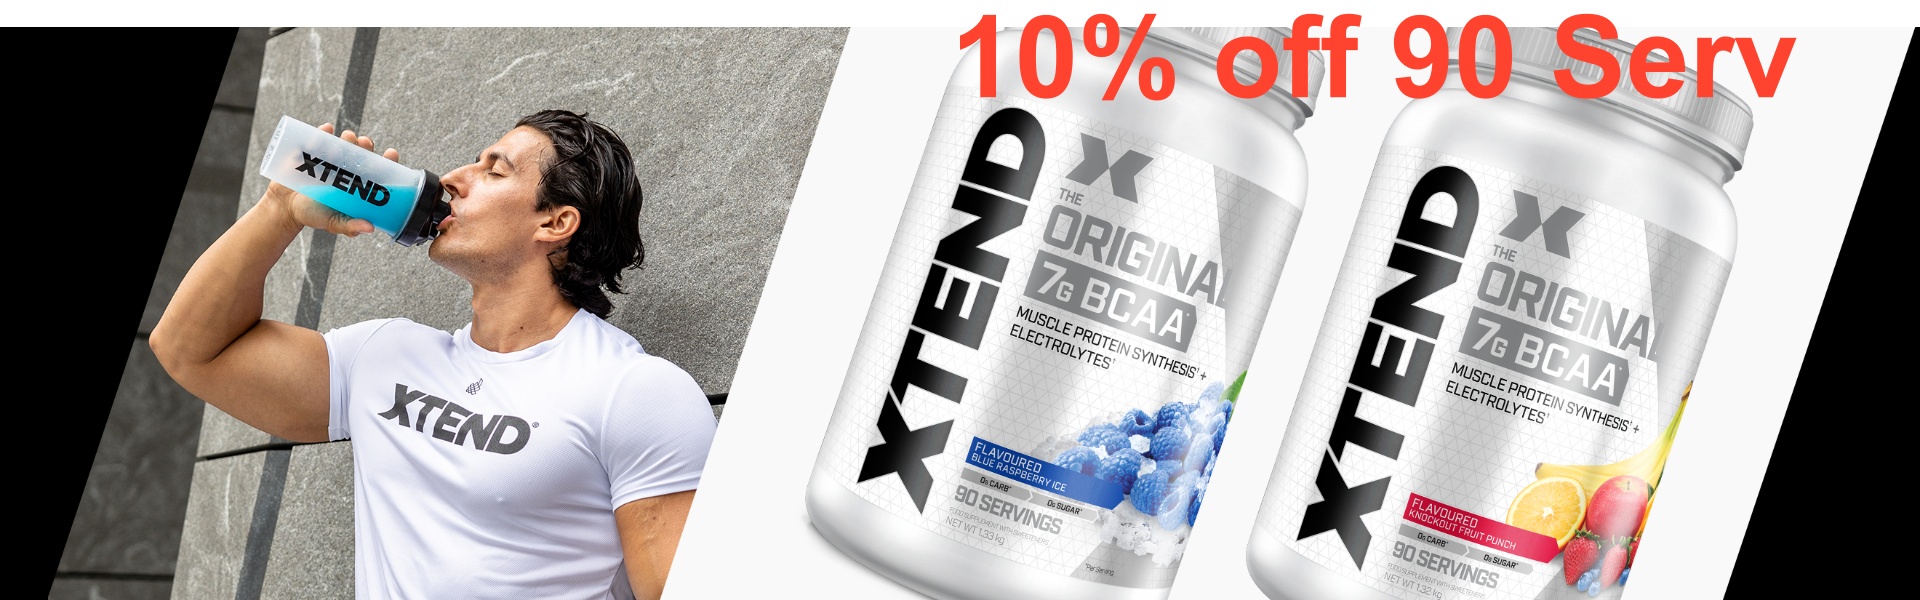 Xtend 90s 10% off